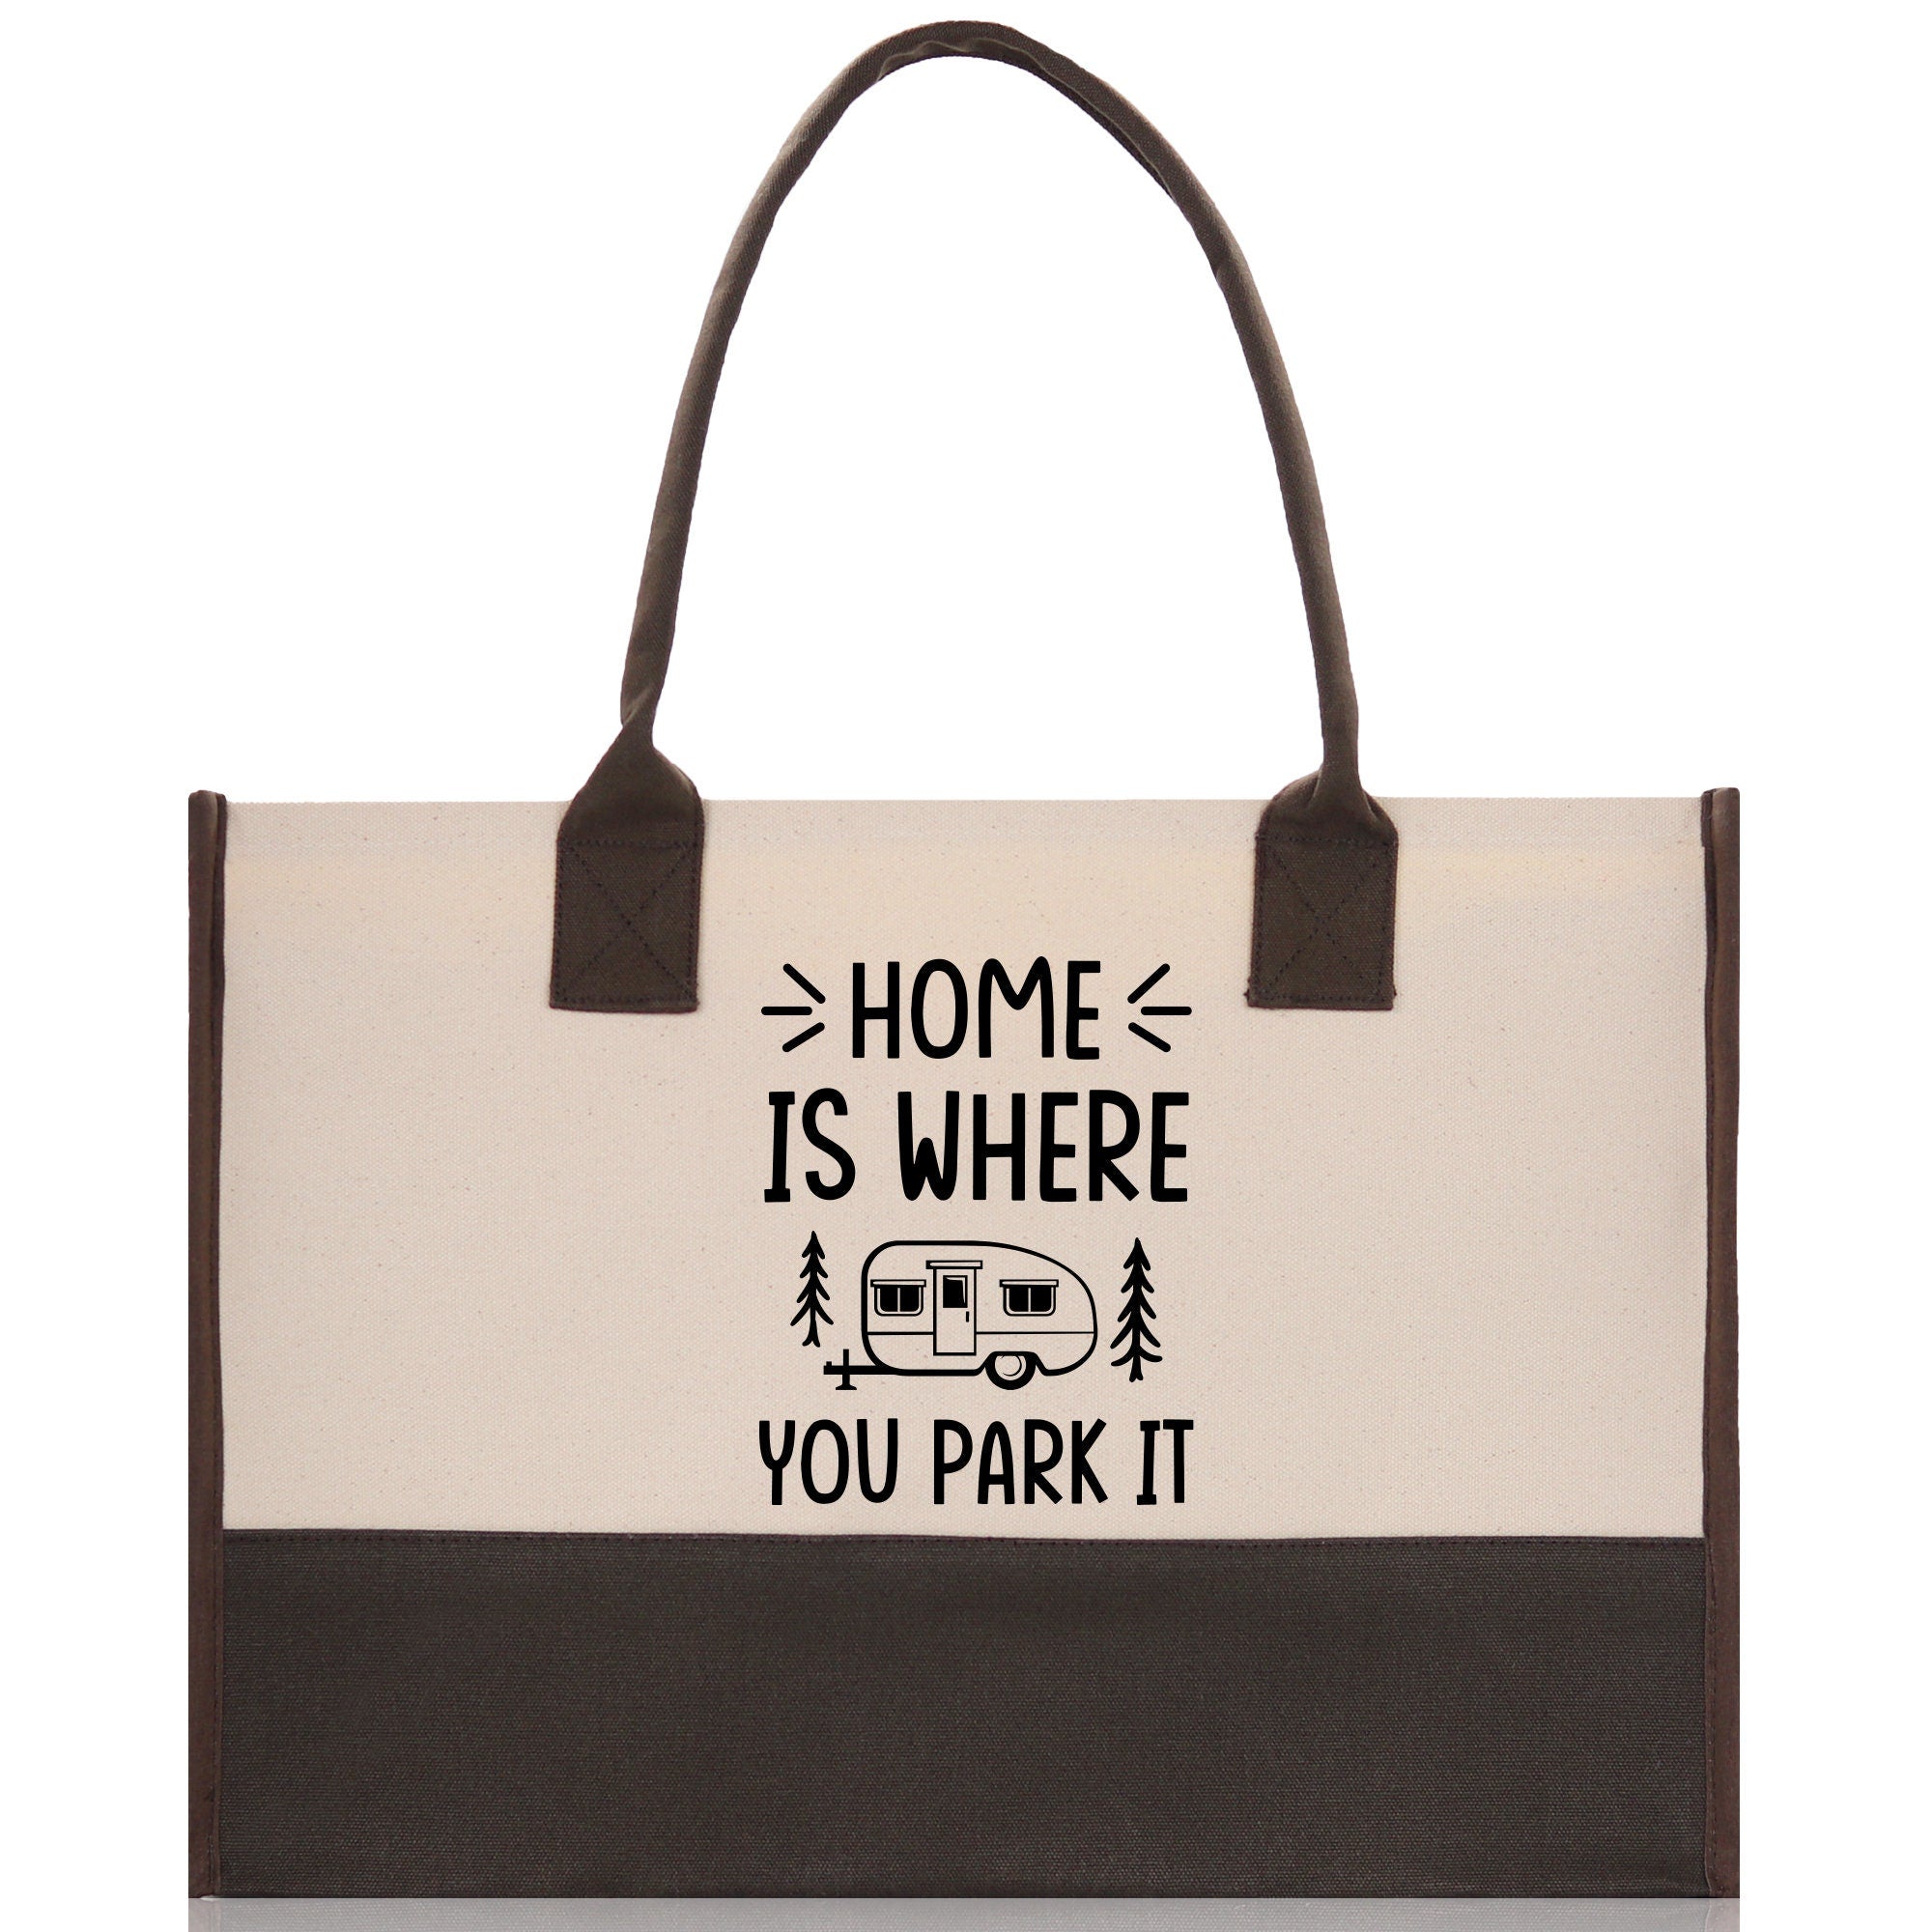 Home is Where You Park It Cotton Canvas Chic Tote Bag Camping Tote Camping Lover Gift Tote Bag Outdoor Tote Multipurpose Camper Tote